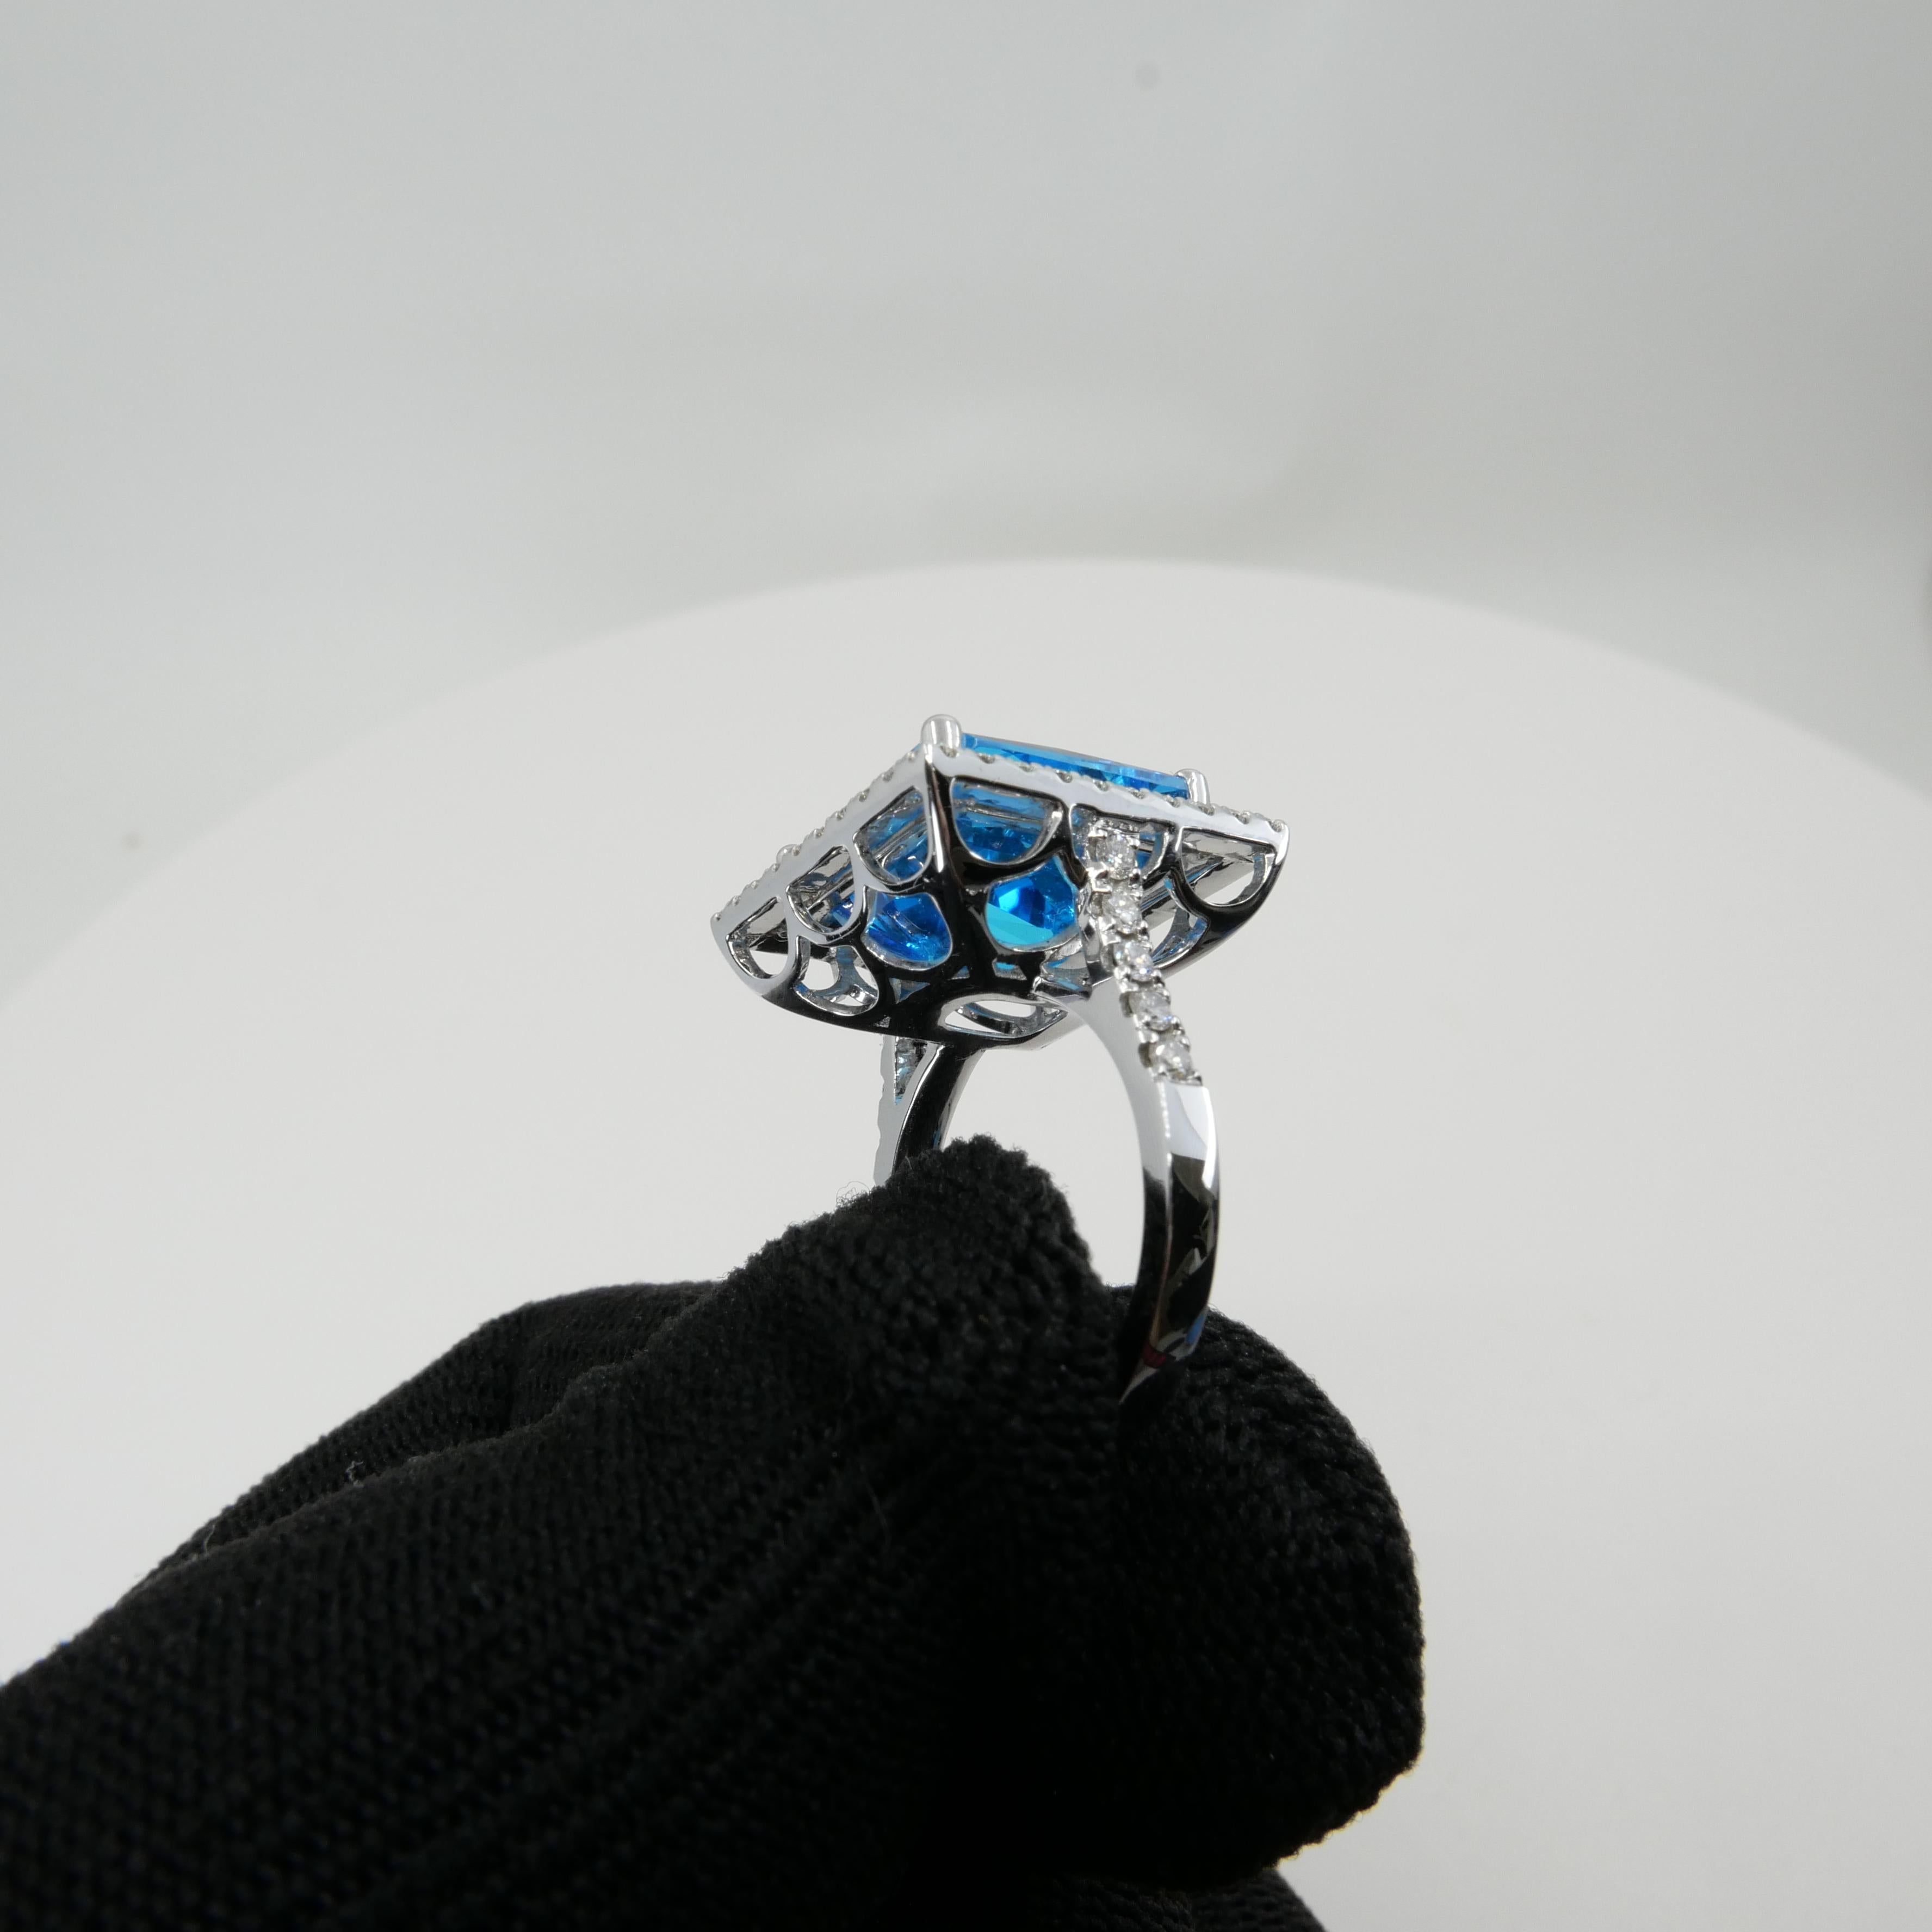  13 Cts checker Square Cut Blue Topaz & Diamond Cocktail Ring. Big Statement. For Sale 8